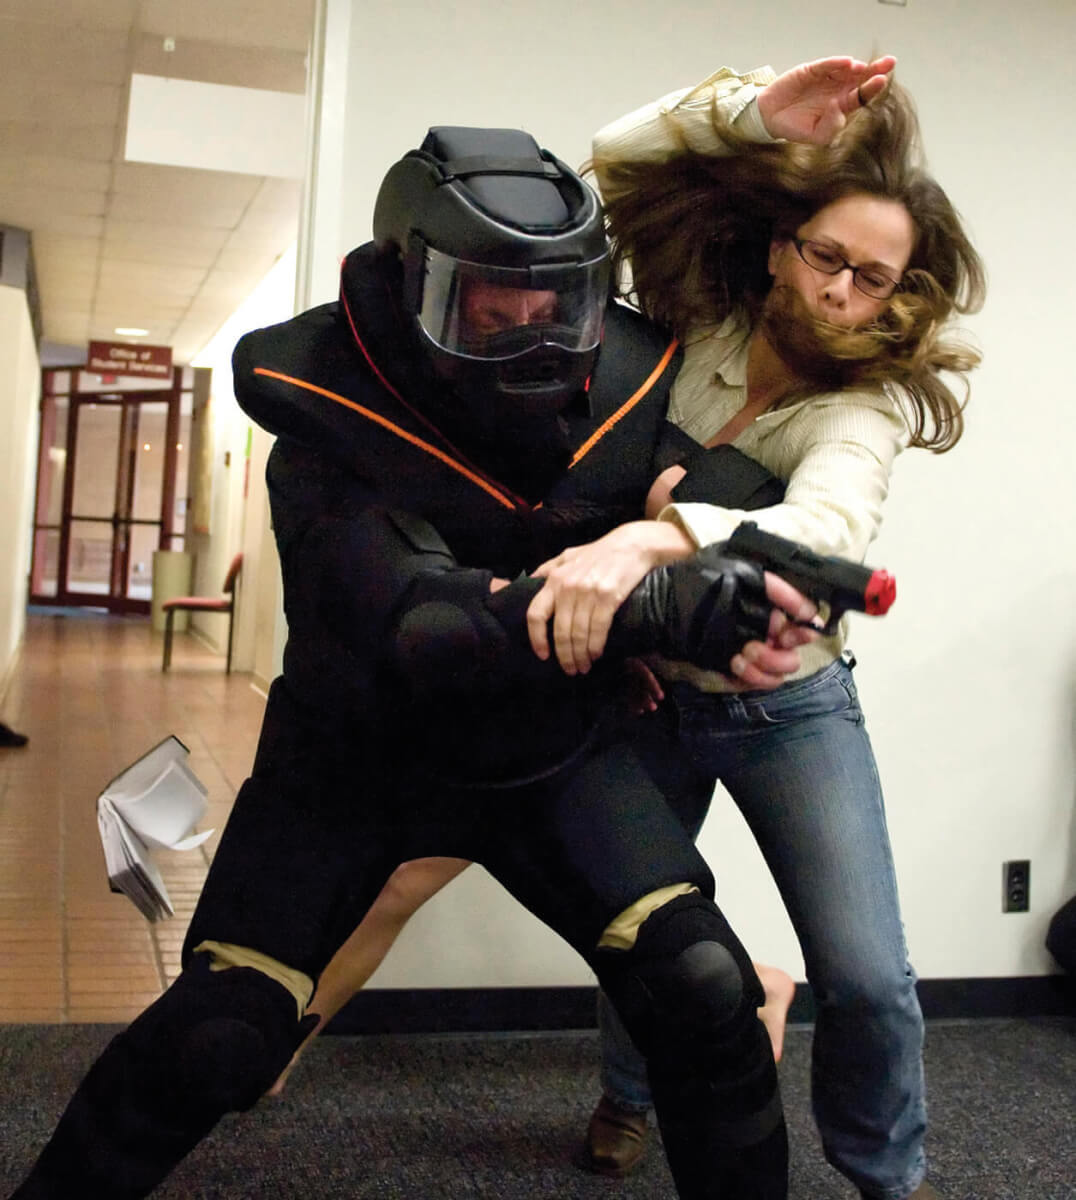 8 Survival Tips for an Active Shooter Situation